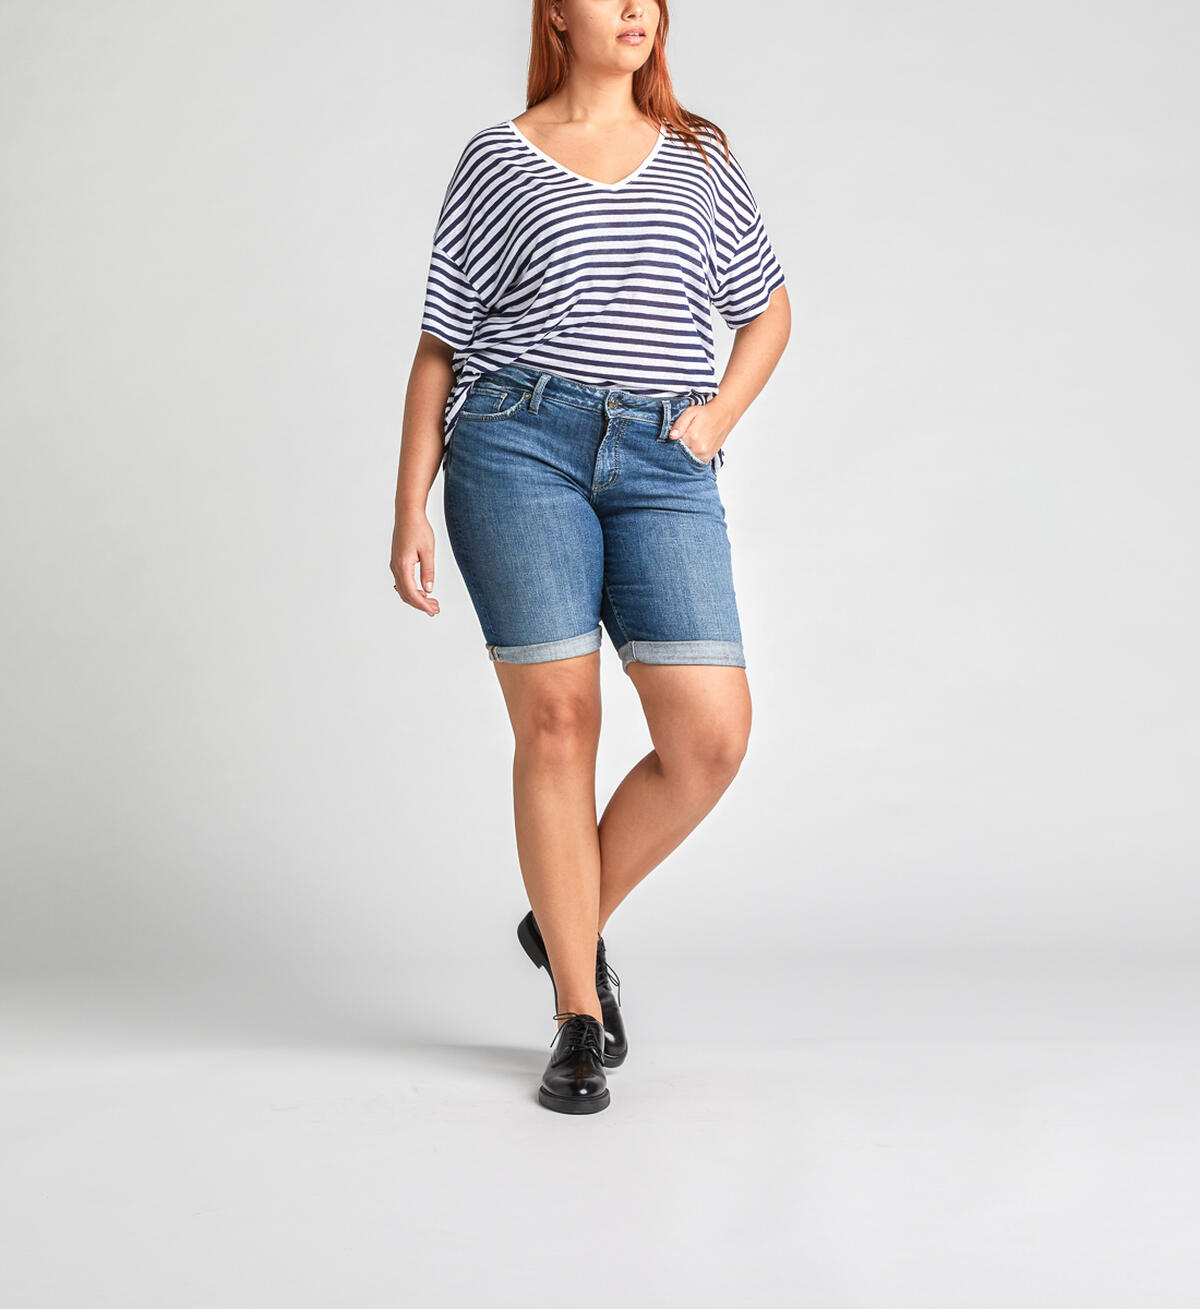 Elyse Mid-Rise Curvy Relaxed Bermuda Short, , hi-res image number 3